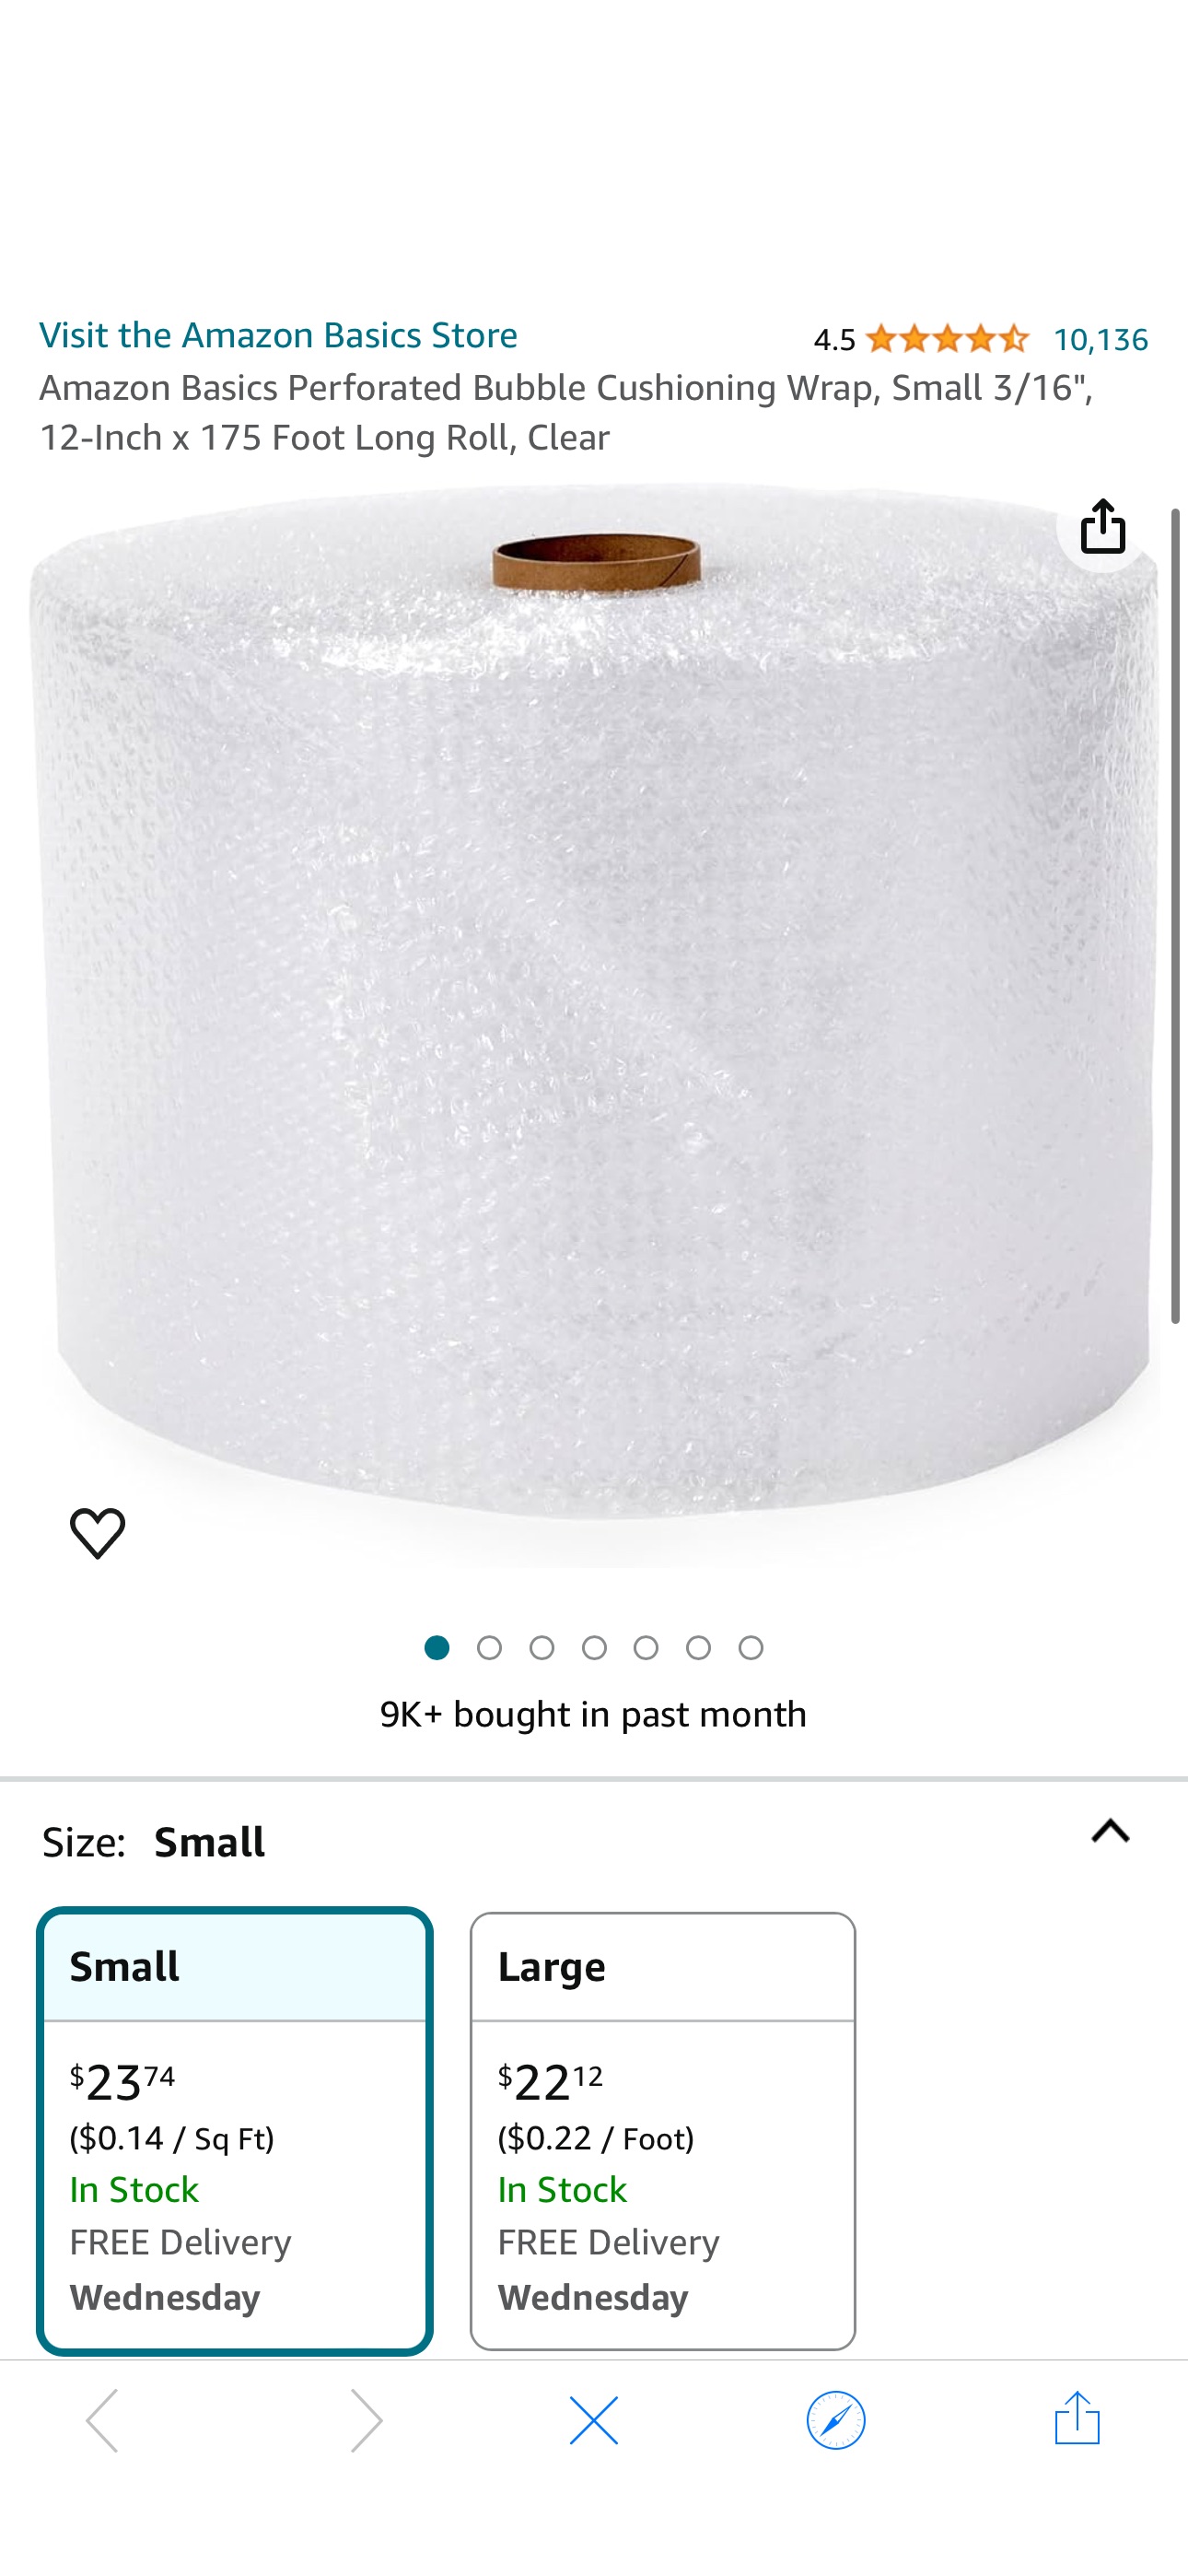 Amazon.com : Amazon Basics Perforated Bubble Cushioning Wrap, Small 3/16", 12-Inch x 175 Foot Long Roll, Clear : Office Products